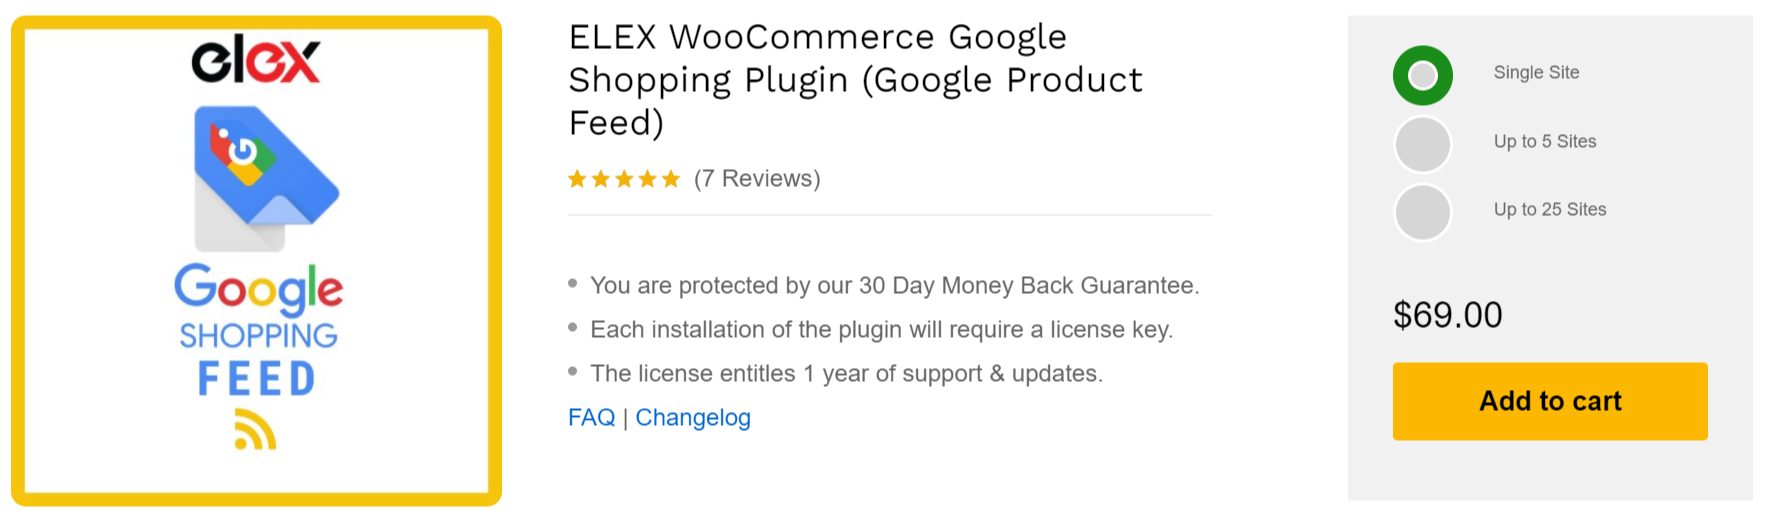 Export your WooCommerce Product Feed with the help of these Google Shopping Plugins | ELEX Google product feed